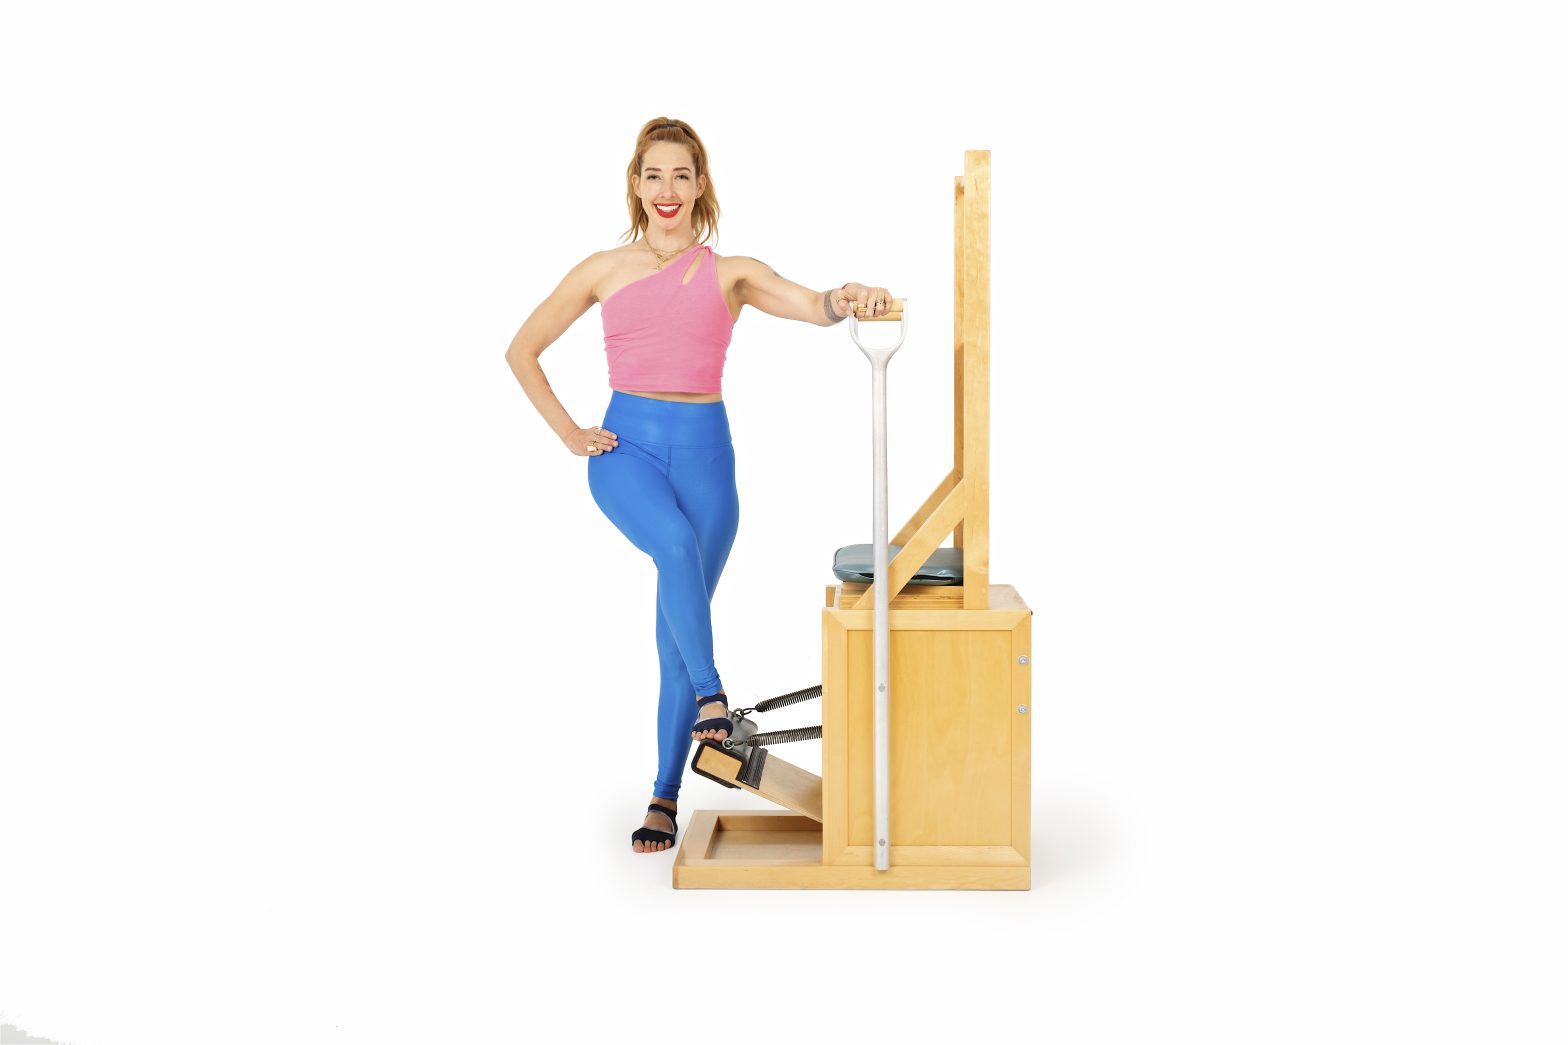 press down cross over on the high chair online pilates classes